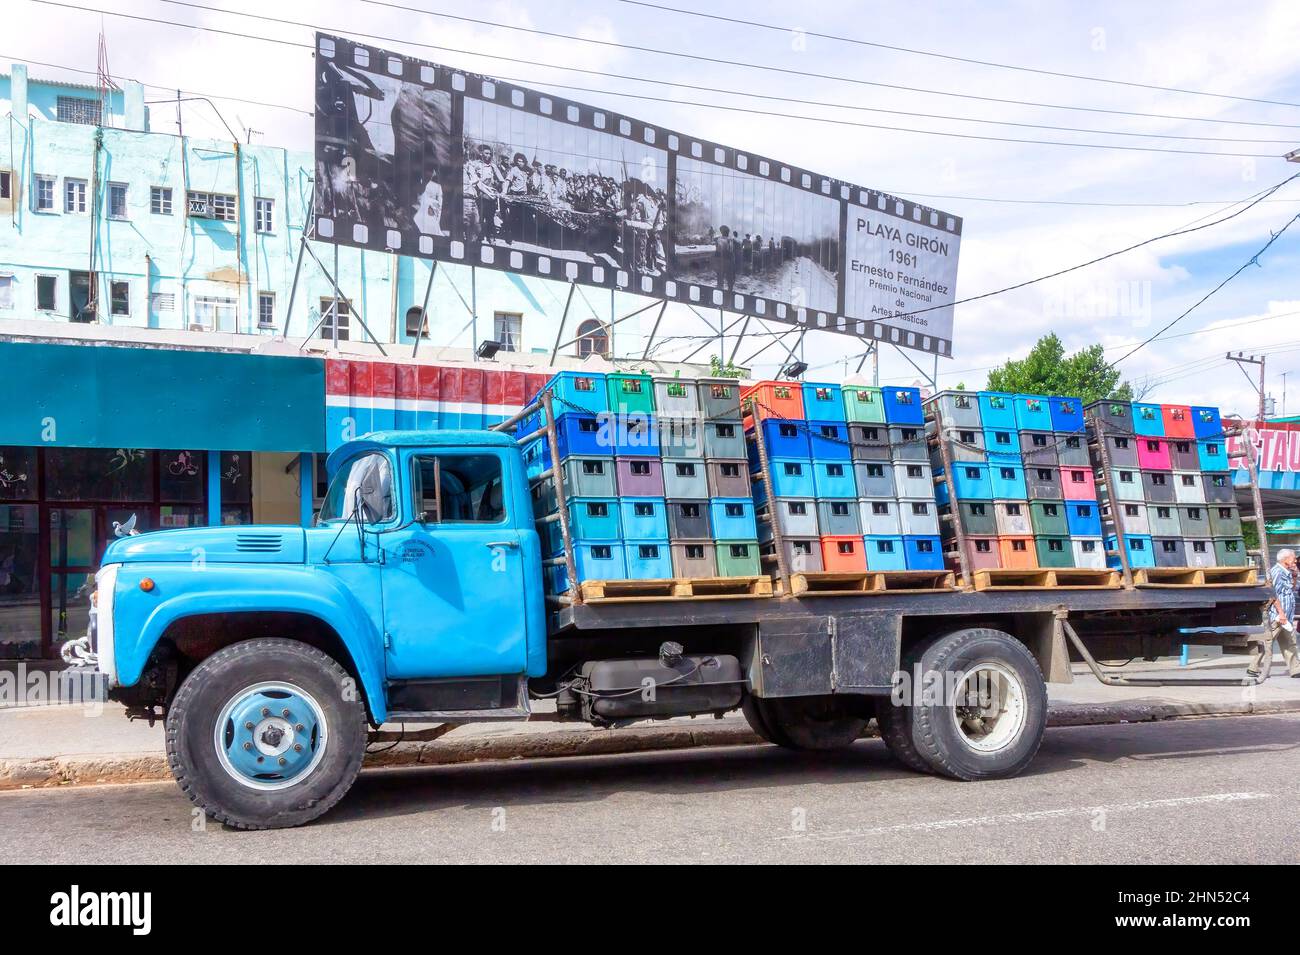 Old Russian Zyl truck distributing beer or carbonated soft drinks to a restaurant business. A sign with images of the Bay of Pigs combat are seen in t Stock Photo